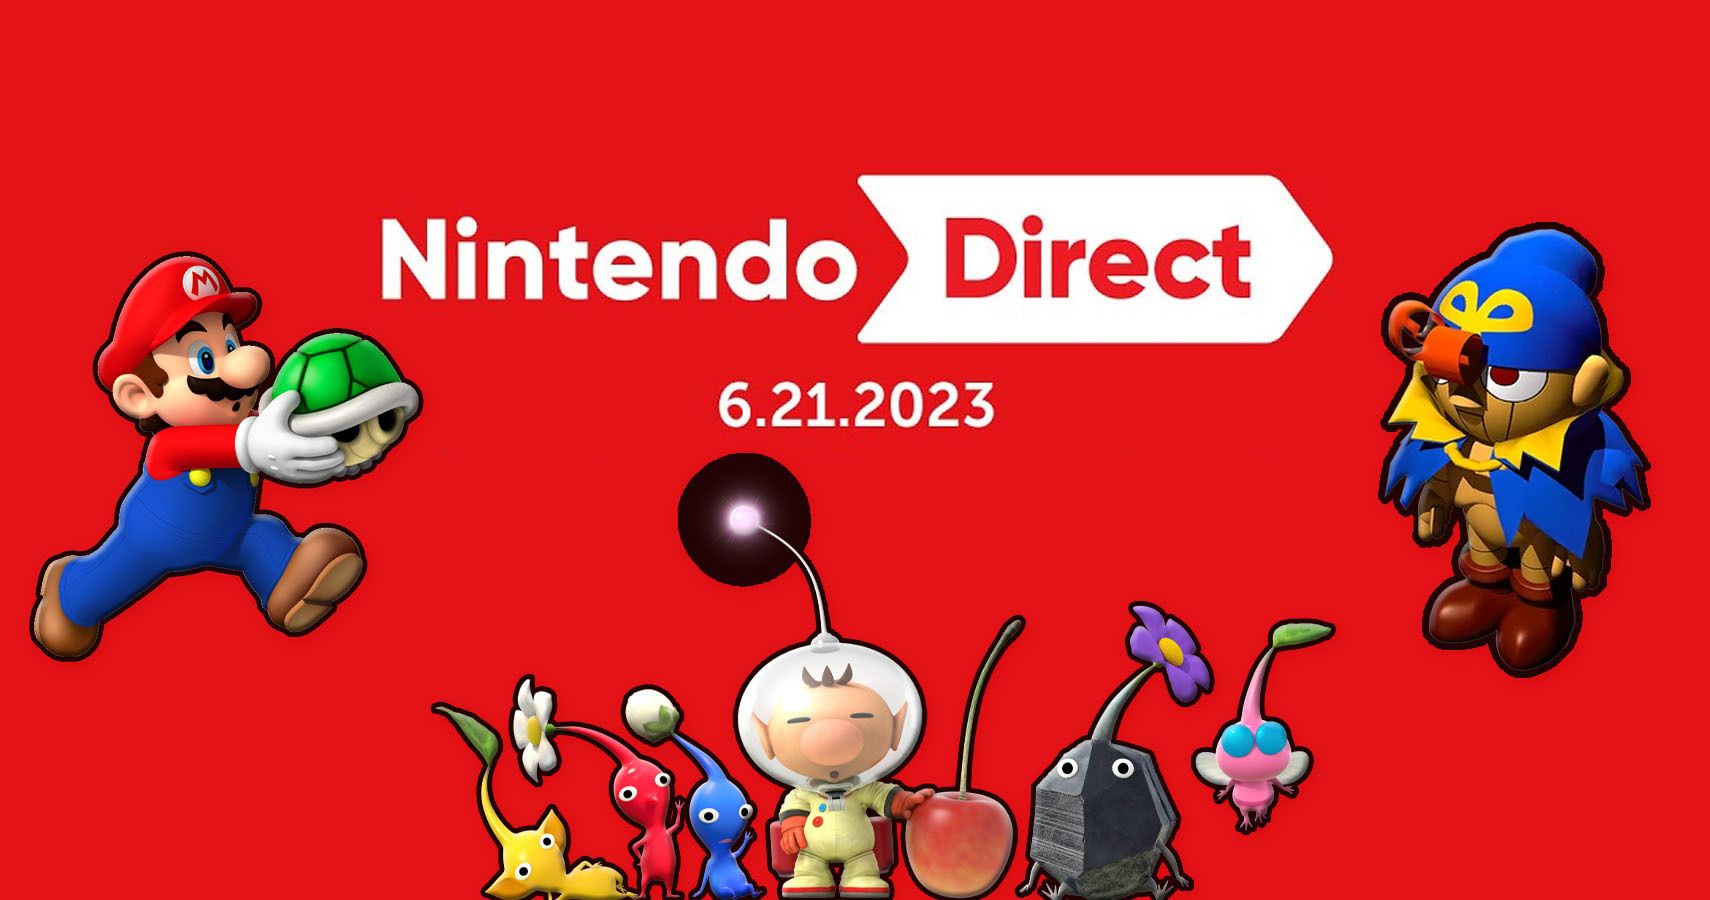 An image featuring Mario holding a shell, the cast of Pikmin, and Geno from Super mario RPG with the Nintendo Direct logo as a background